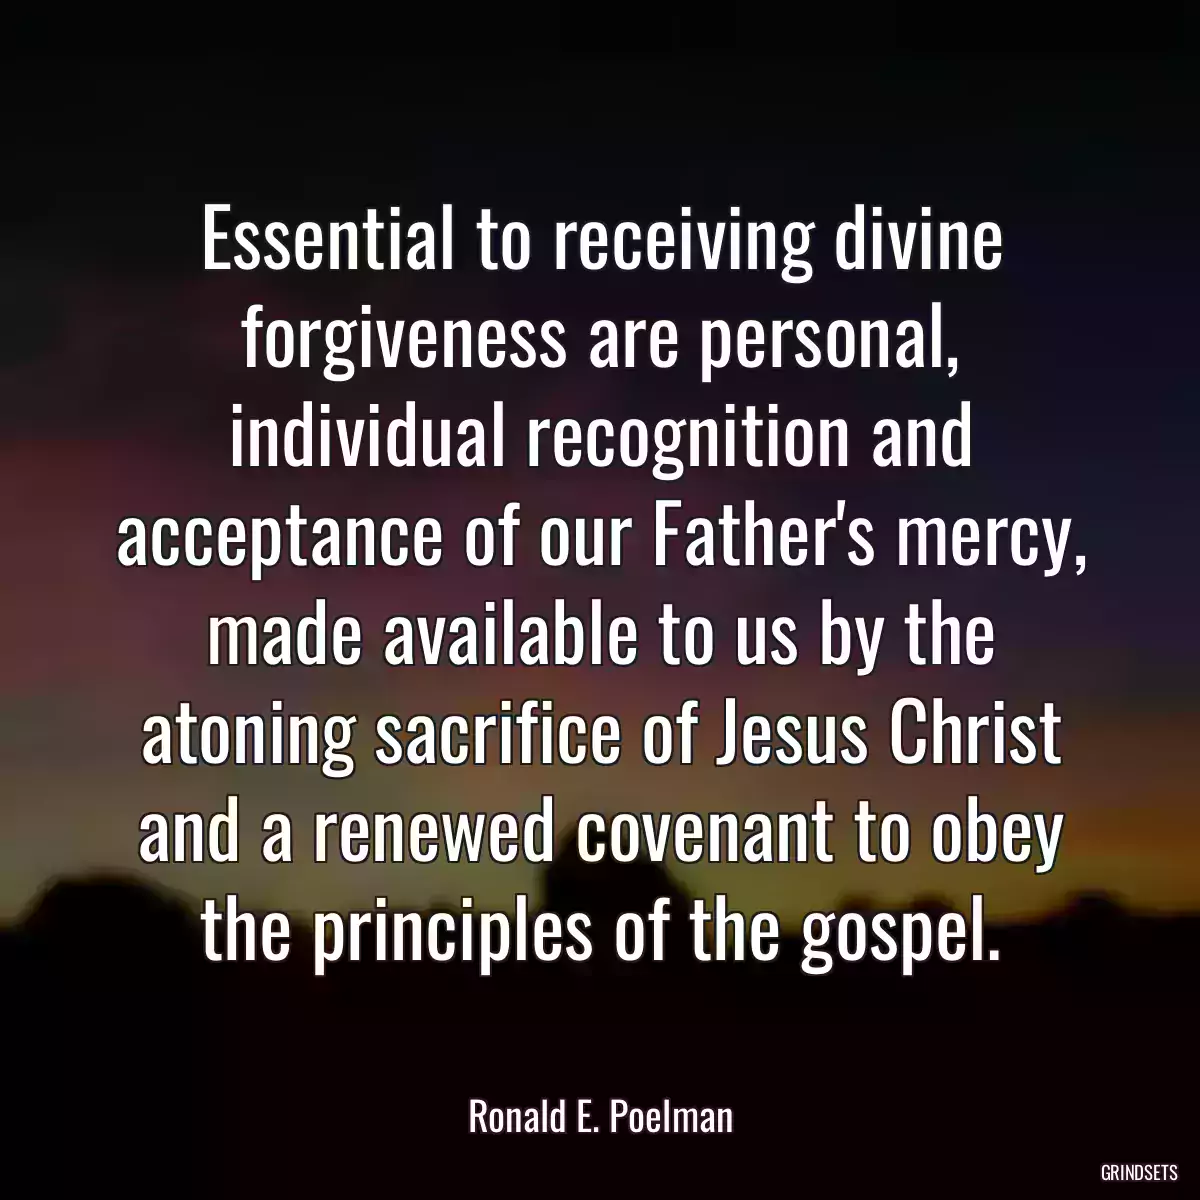 Essential to receiving divine forgiveness are personal, individual recognition and acceptance of our Father\'s mercy, made available to us by the atoning sacrifice of Jesus Christ and a renewed covenant to obey the principles of the gospel.